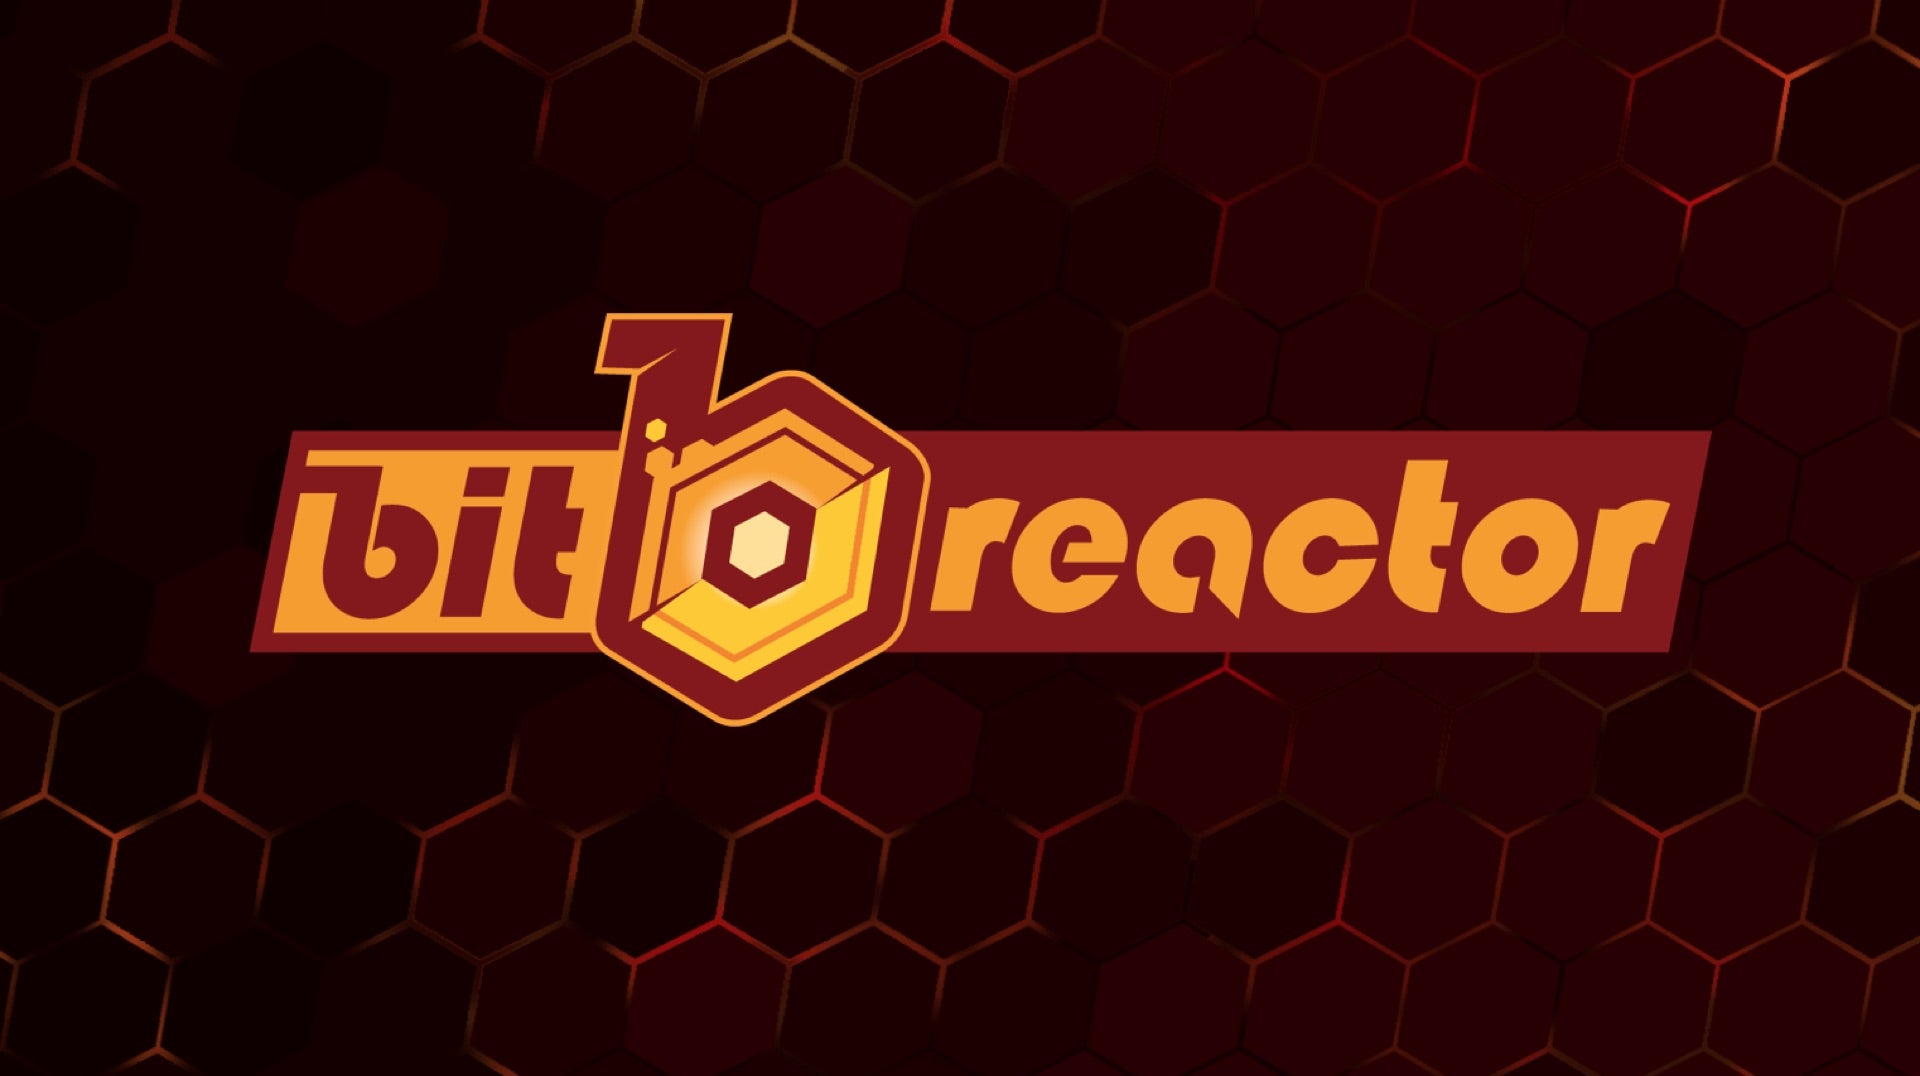 Image for Firaxis veterans form new studio Bit Reactor to focus on turn-based strategy games